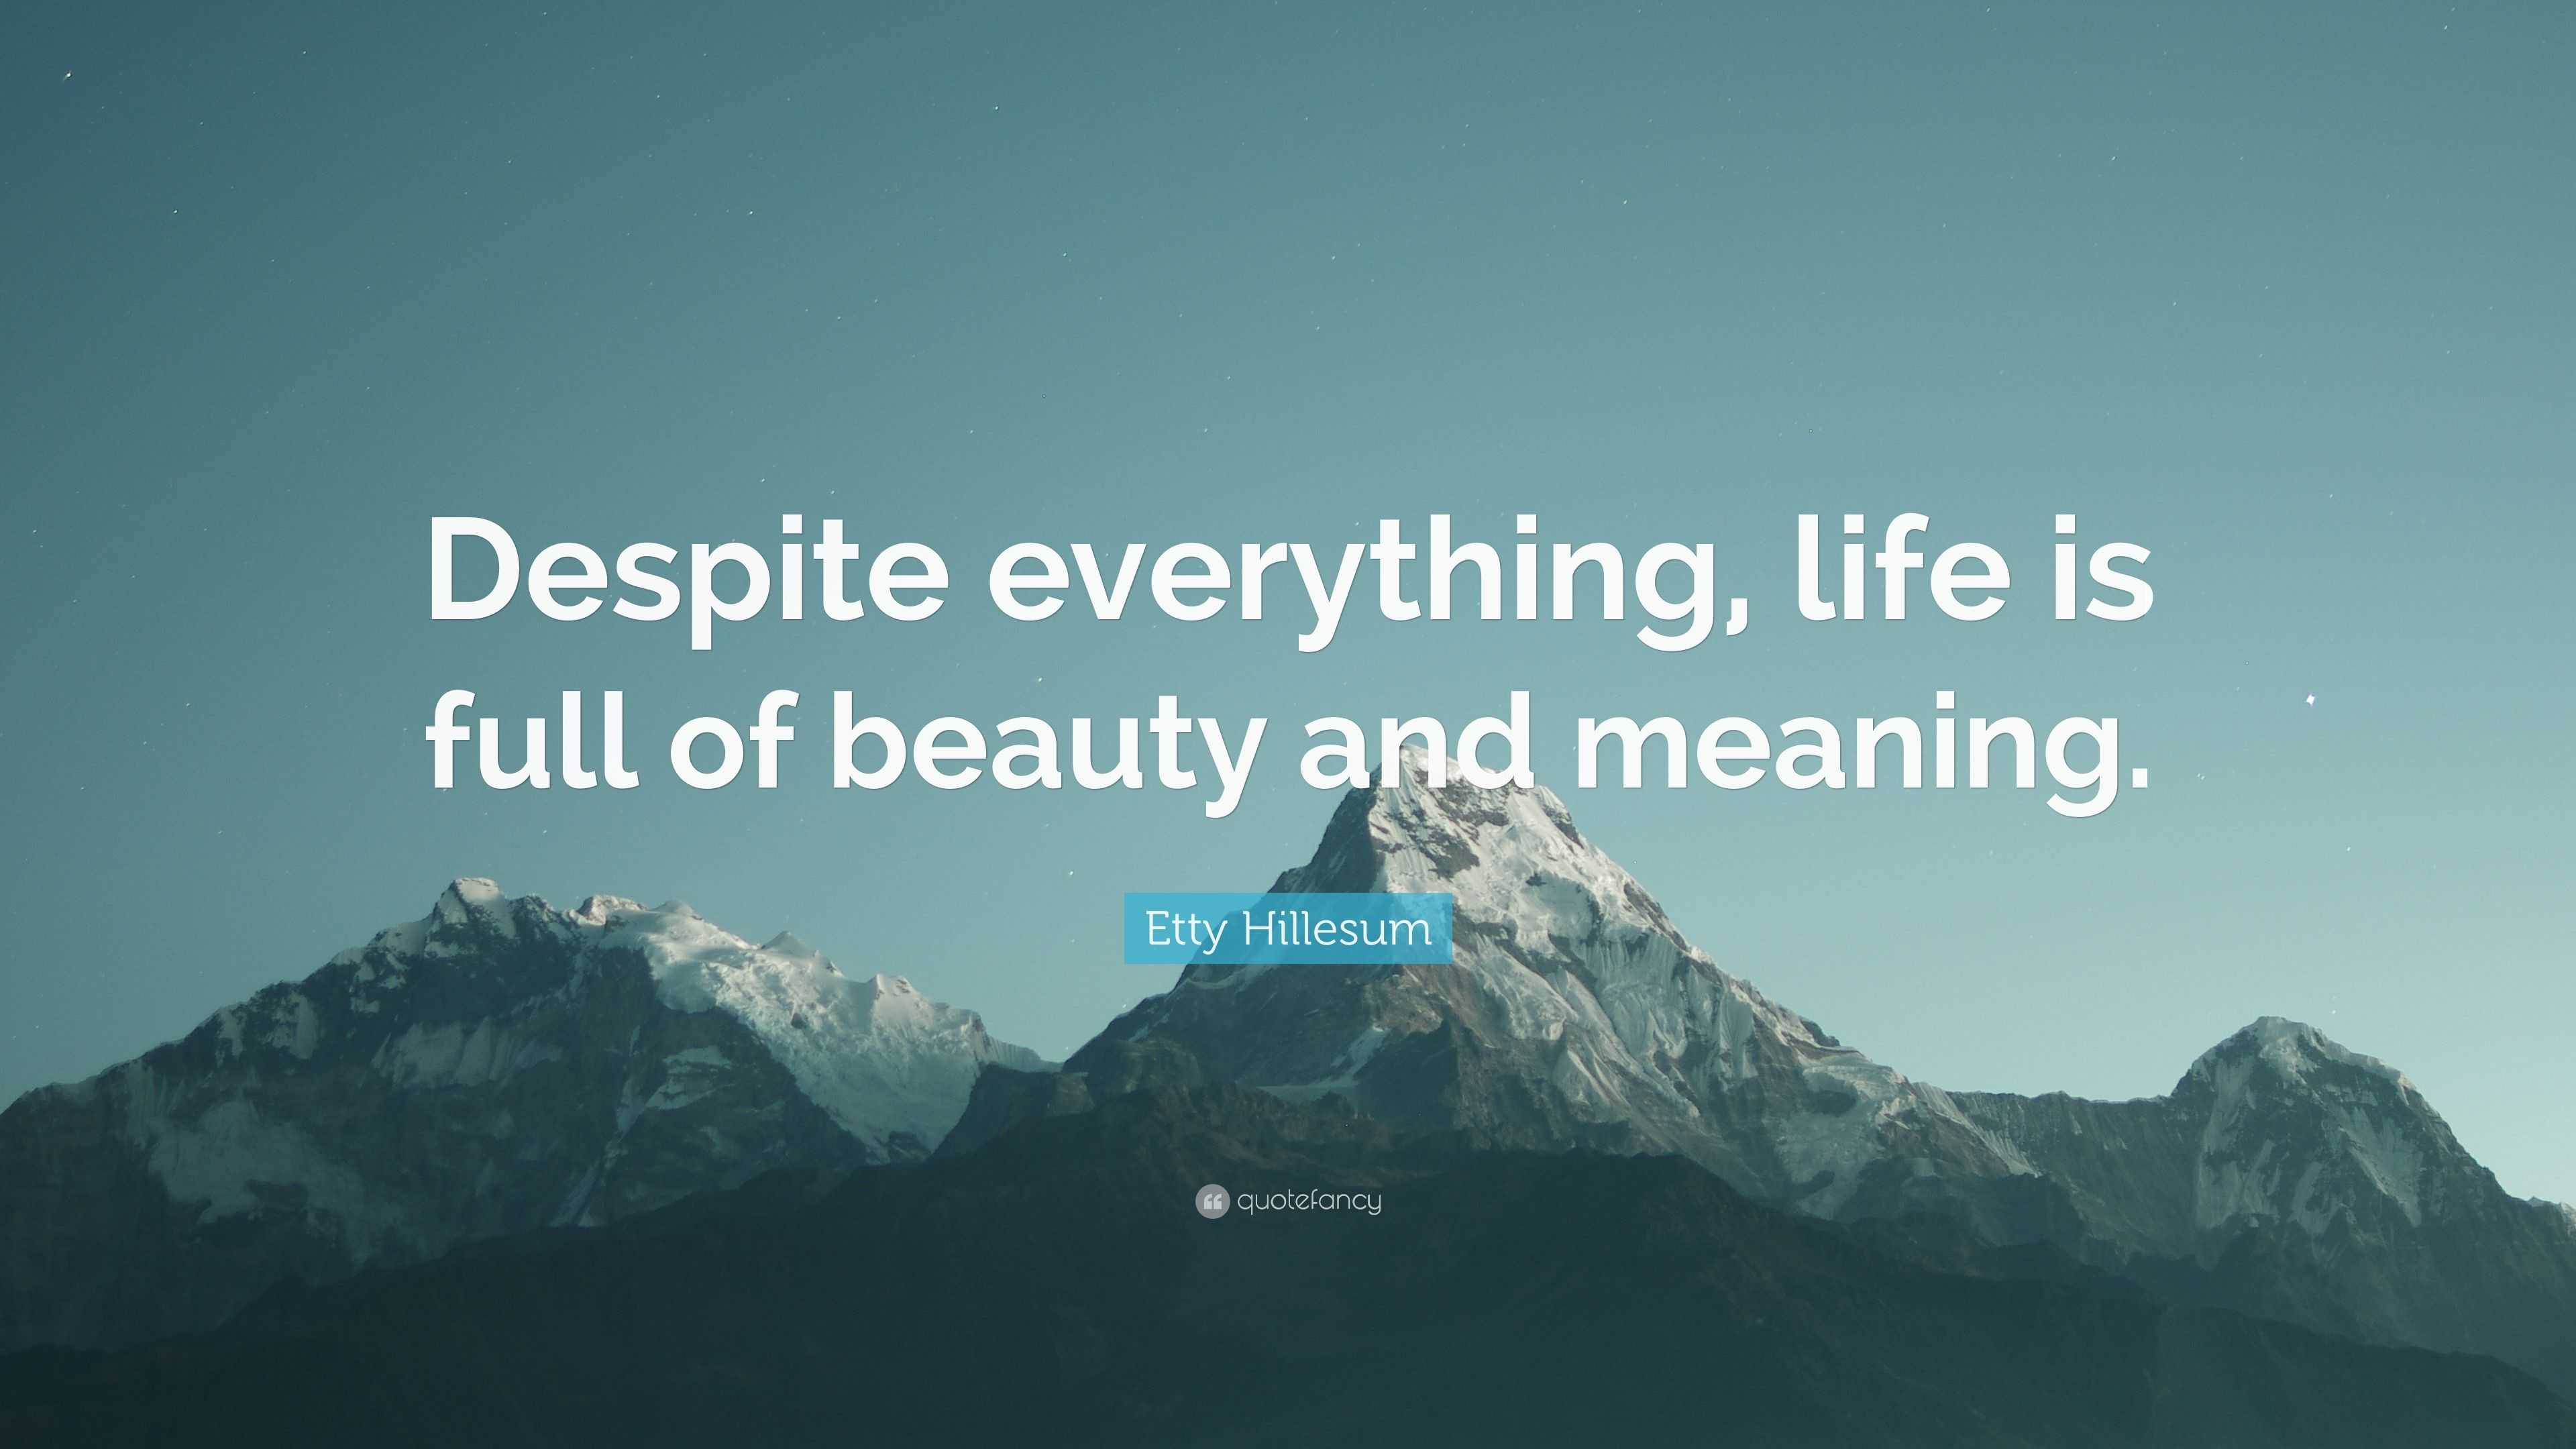 Etty Hillesum Quote “Despite everything life is full of beauty and meaning